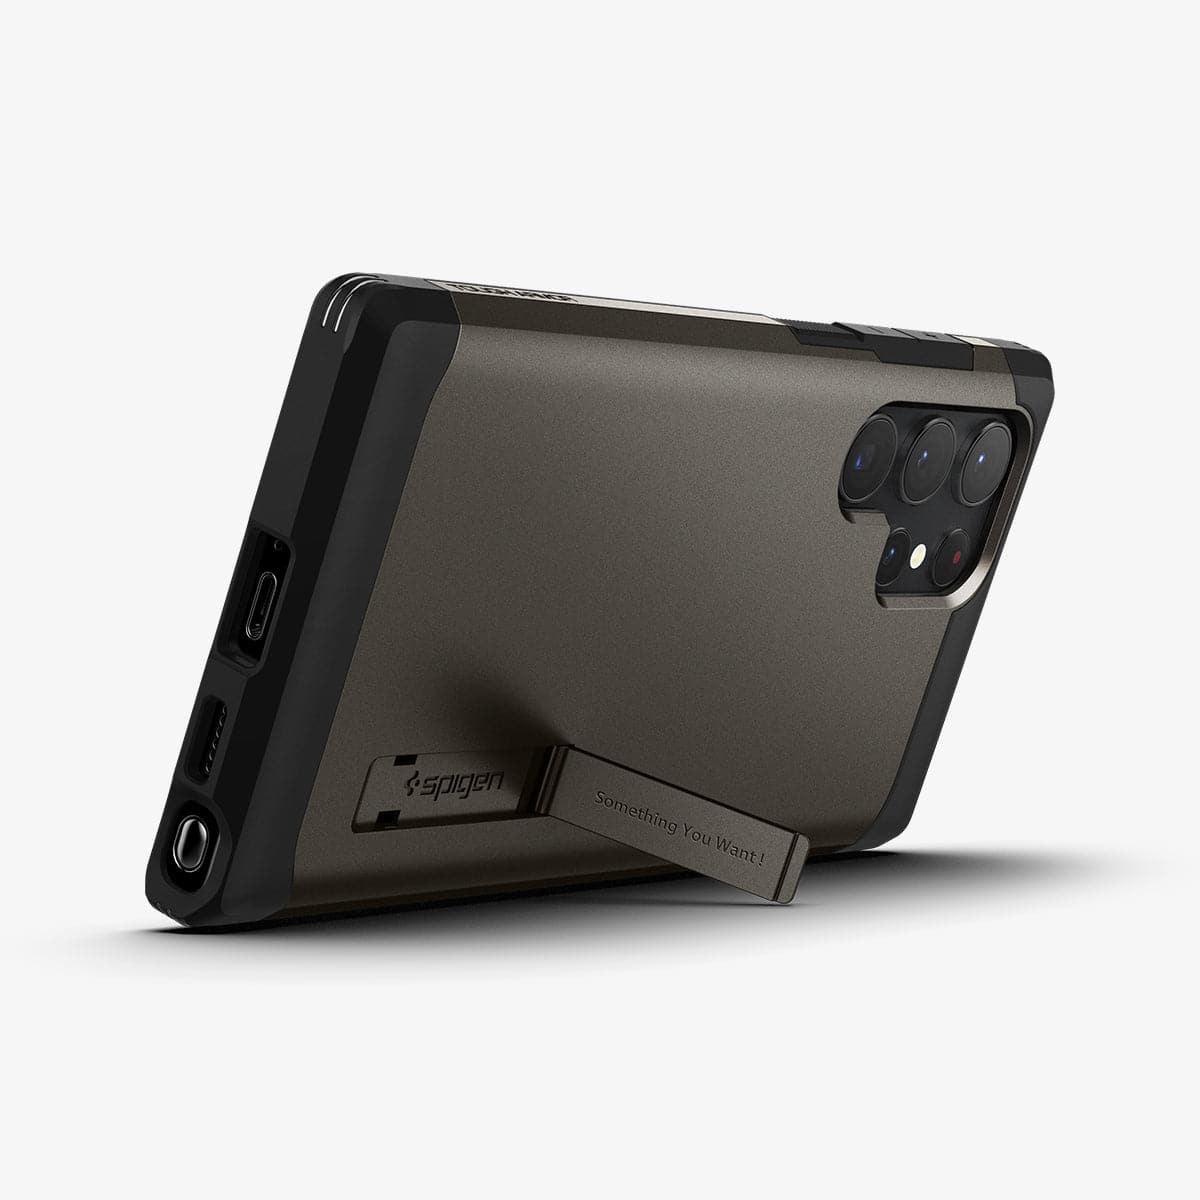 ACS03924 - Galaxy S22 Ultra 5G Case Tough Armor in gunmetal showing the back and bottom with device propped up by built in kickstand